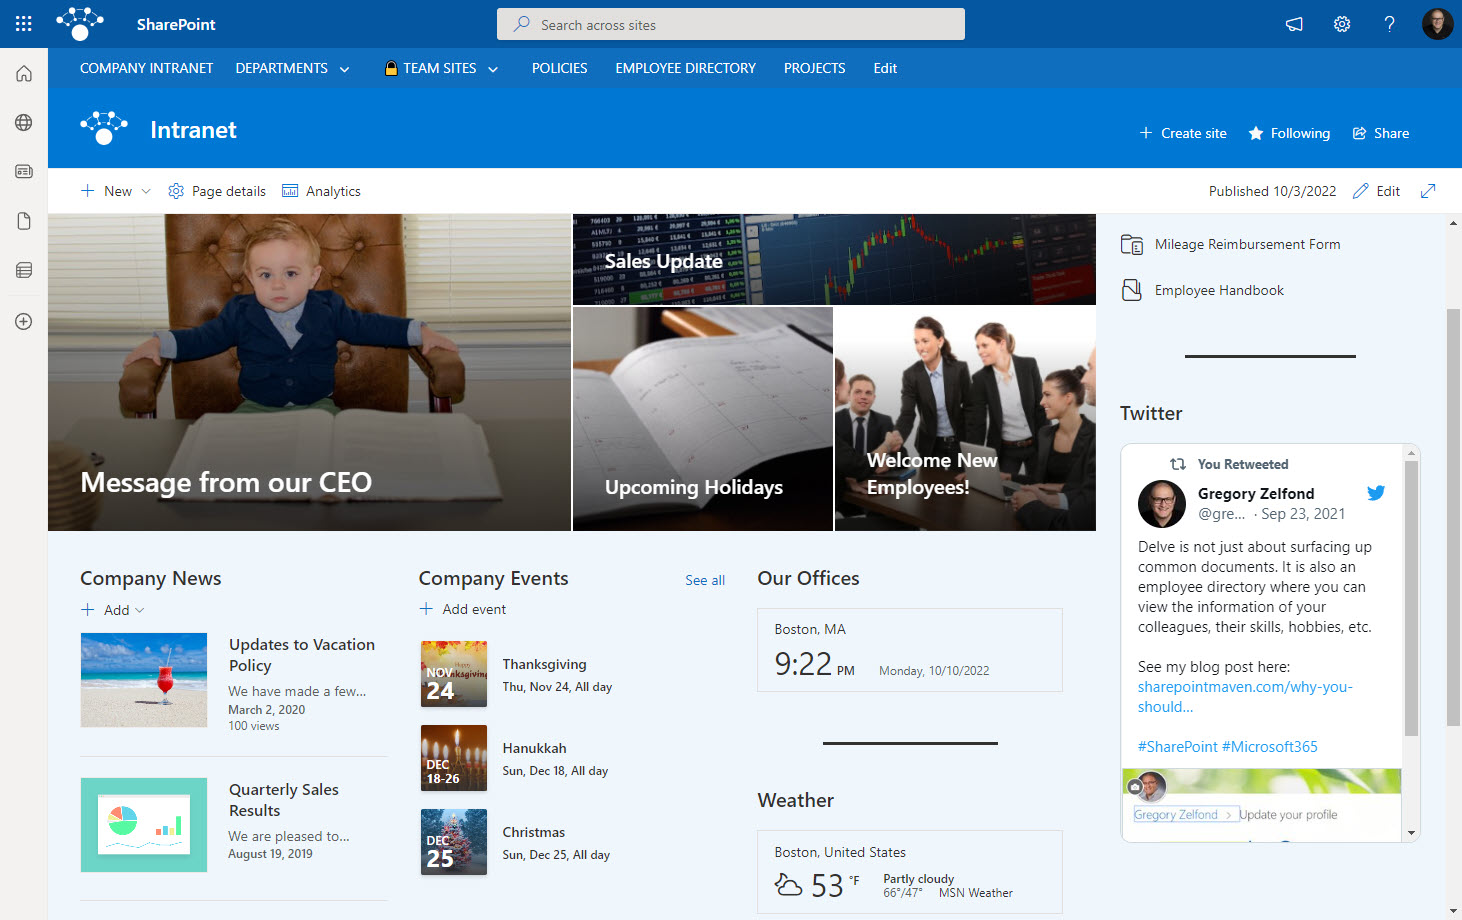 Create SharePoint Intranet - Example of an Intranet built from scratch using Out-of-the-Box functionality